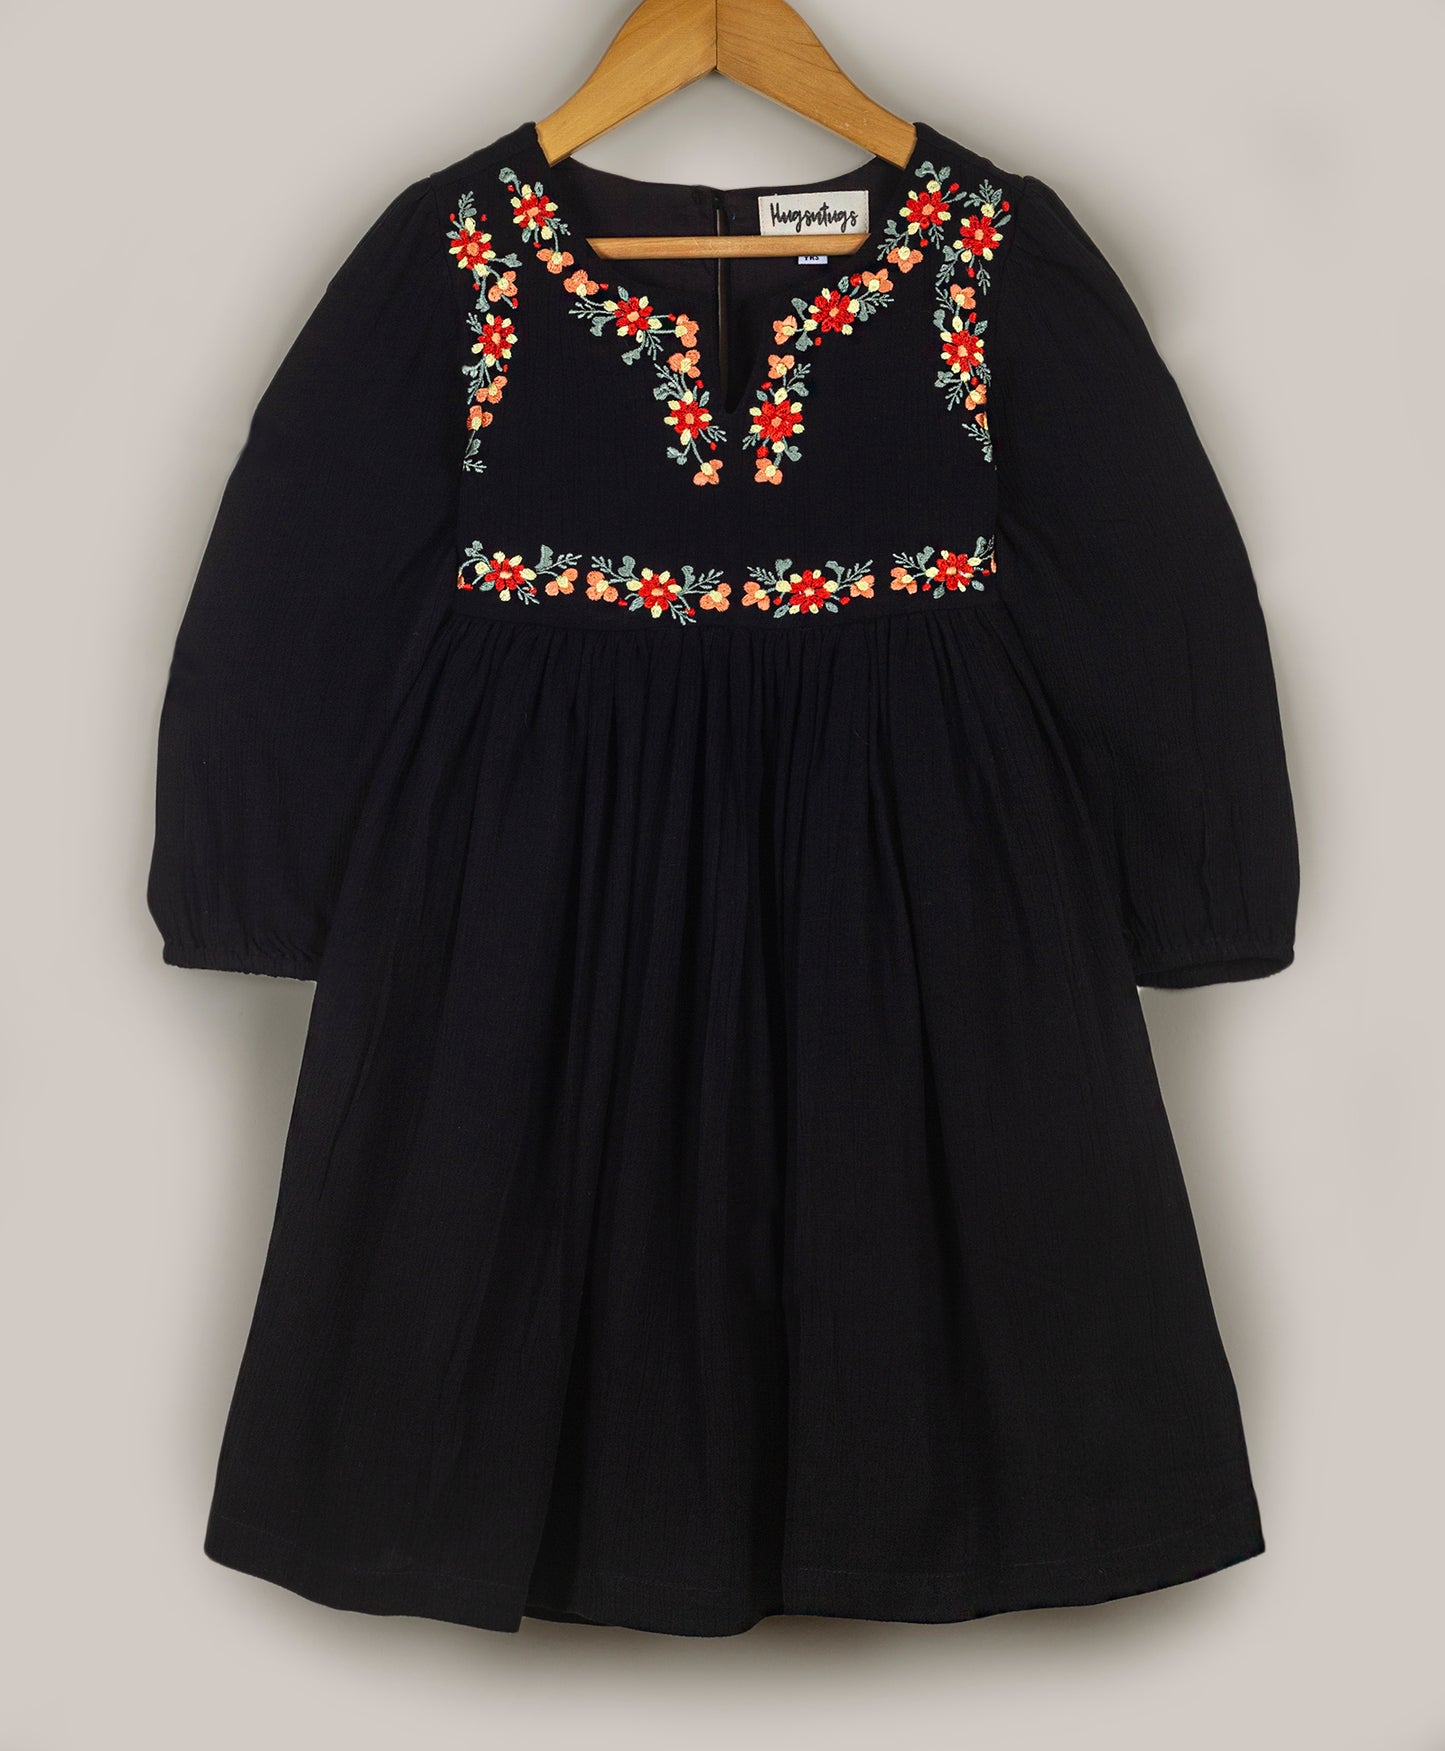 SOLID BLACK DRESS WITH MULTI COLOUR FLORAL EMBROIDERY